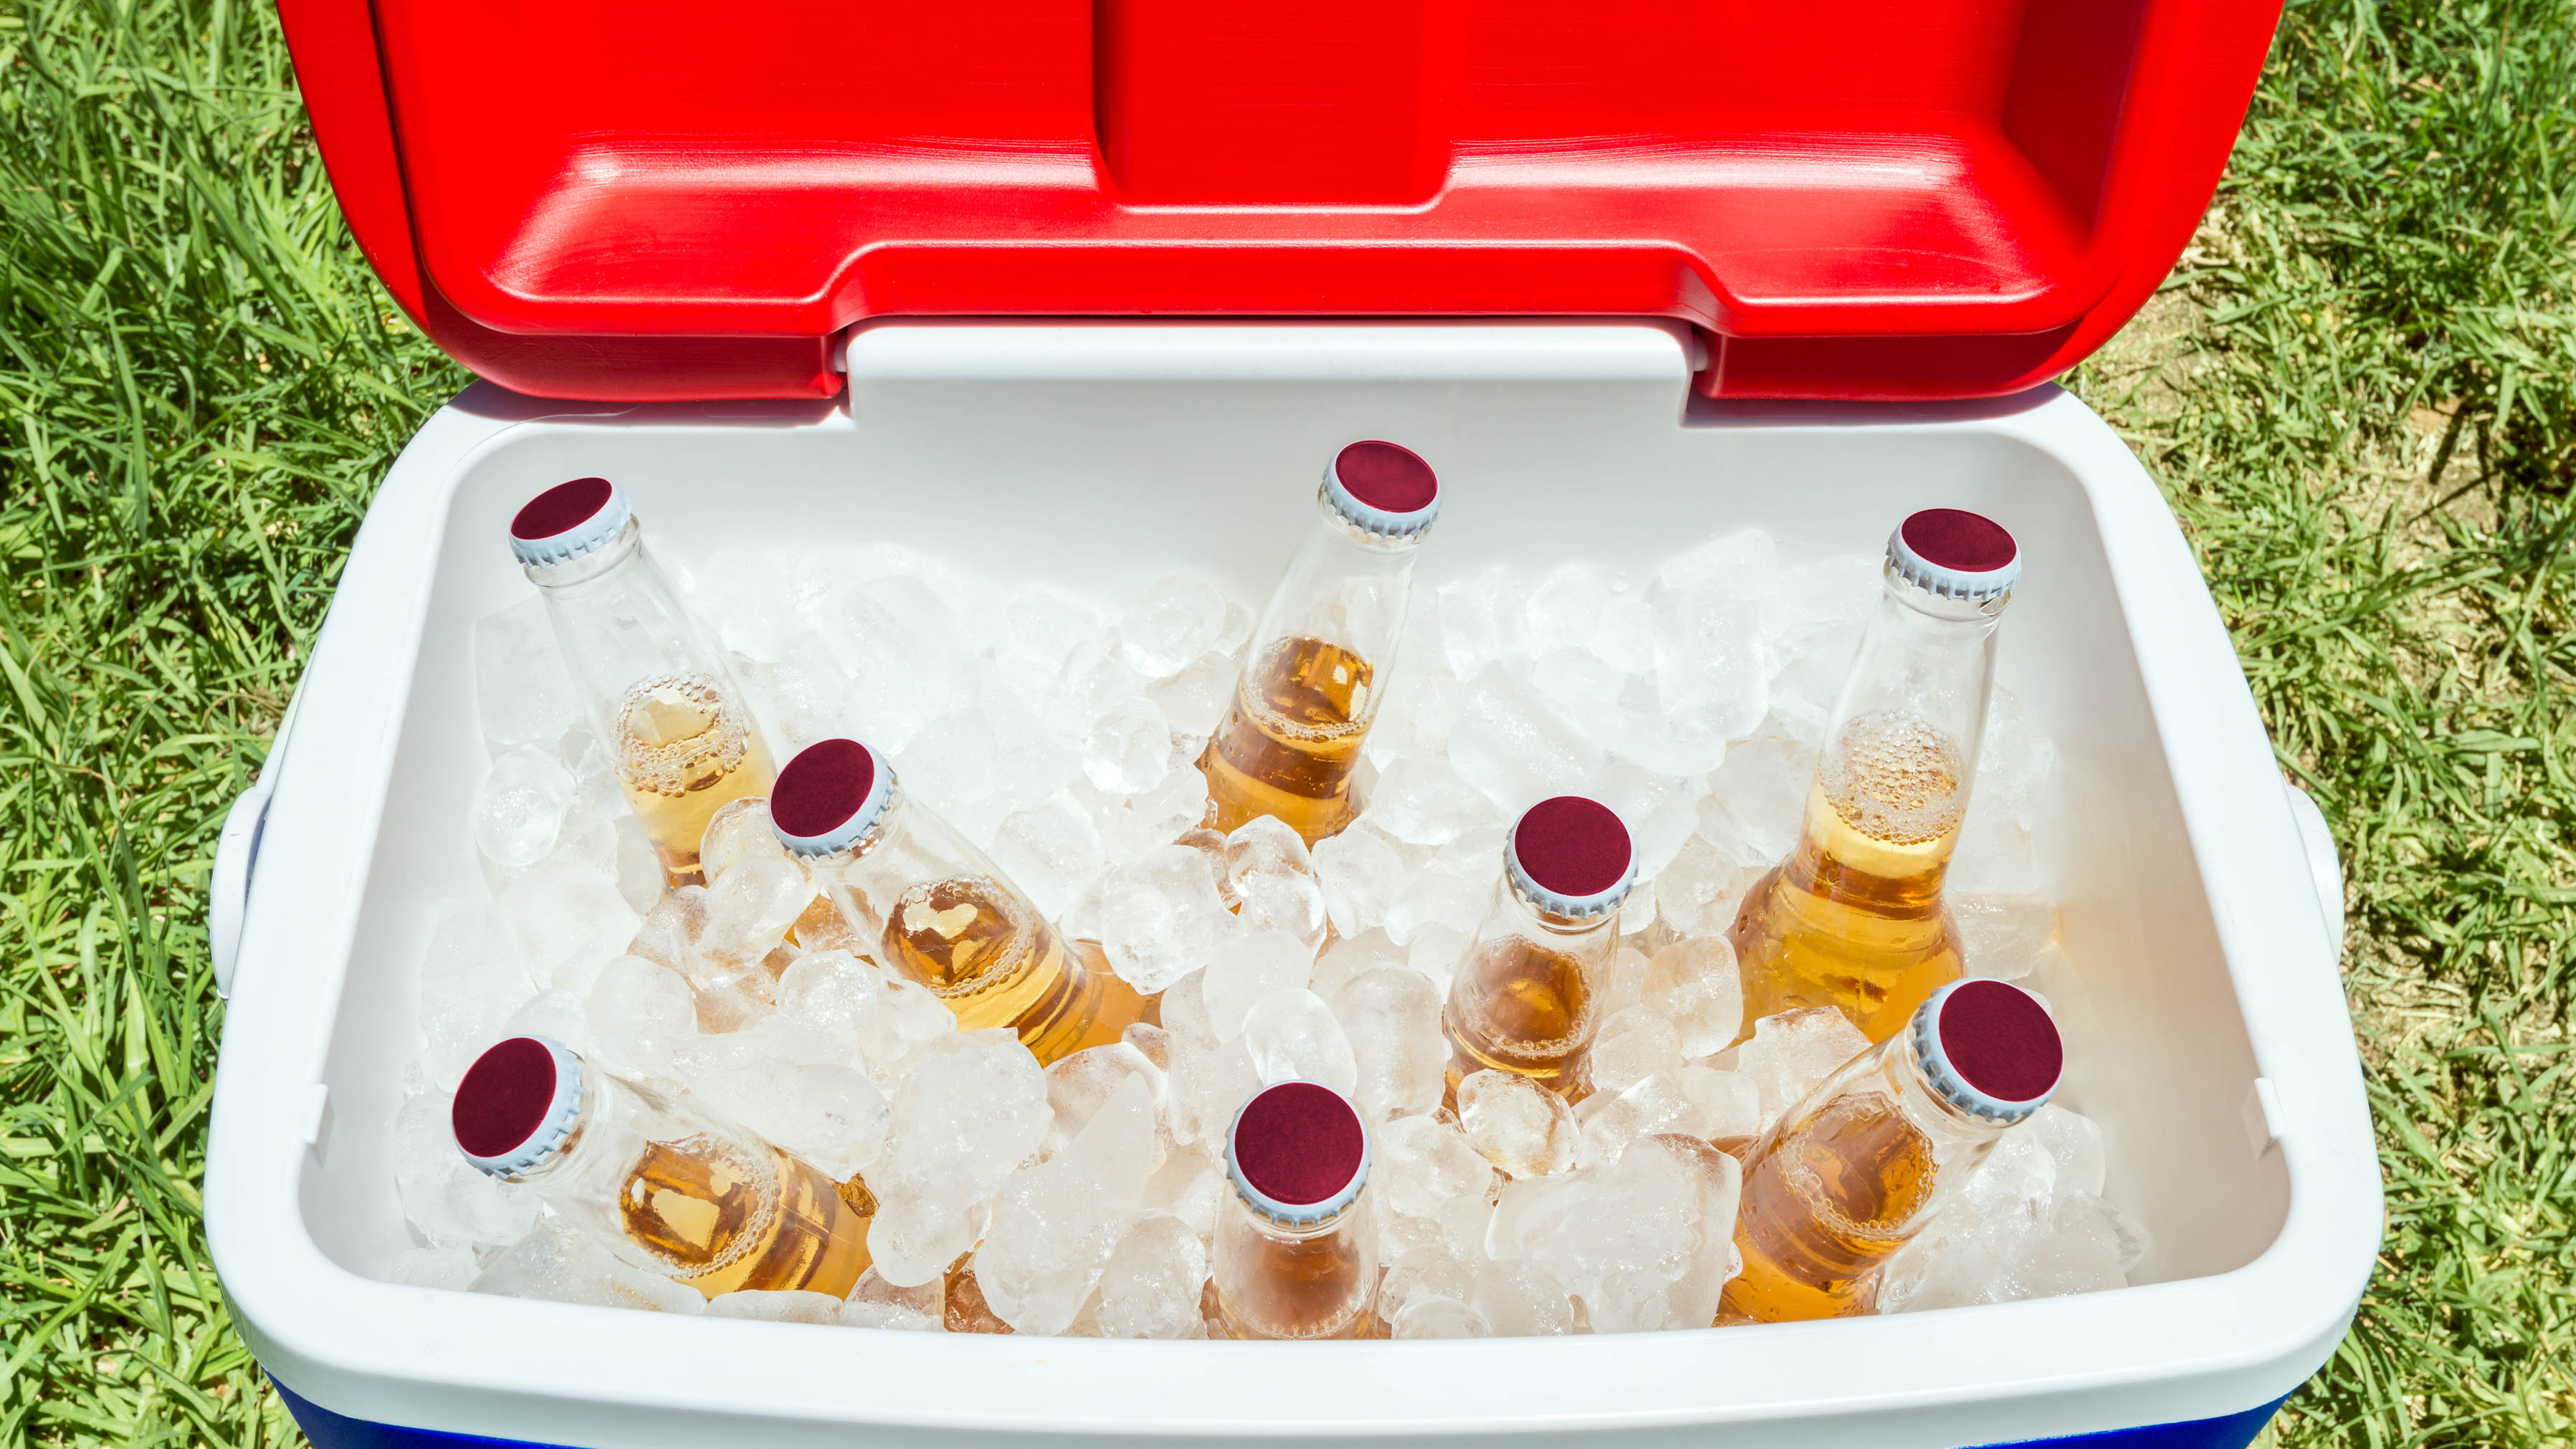 Red ice cooler with bottles inside